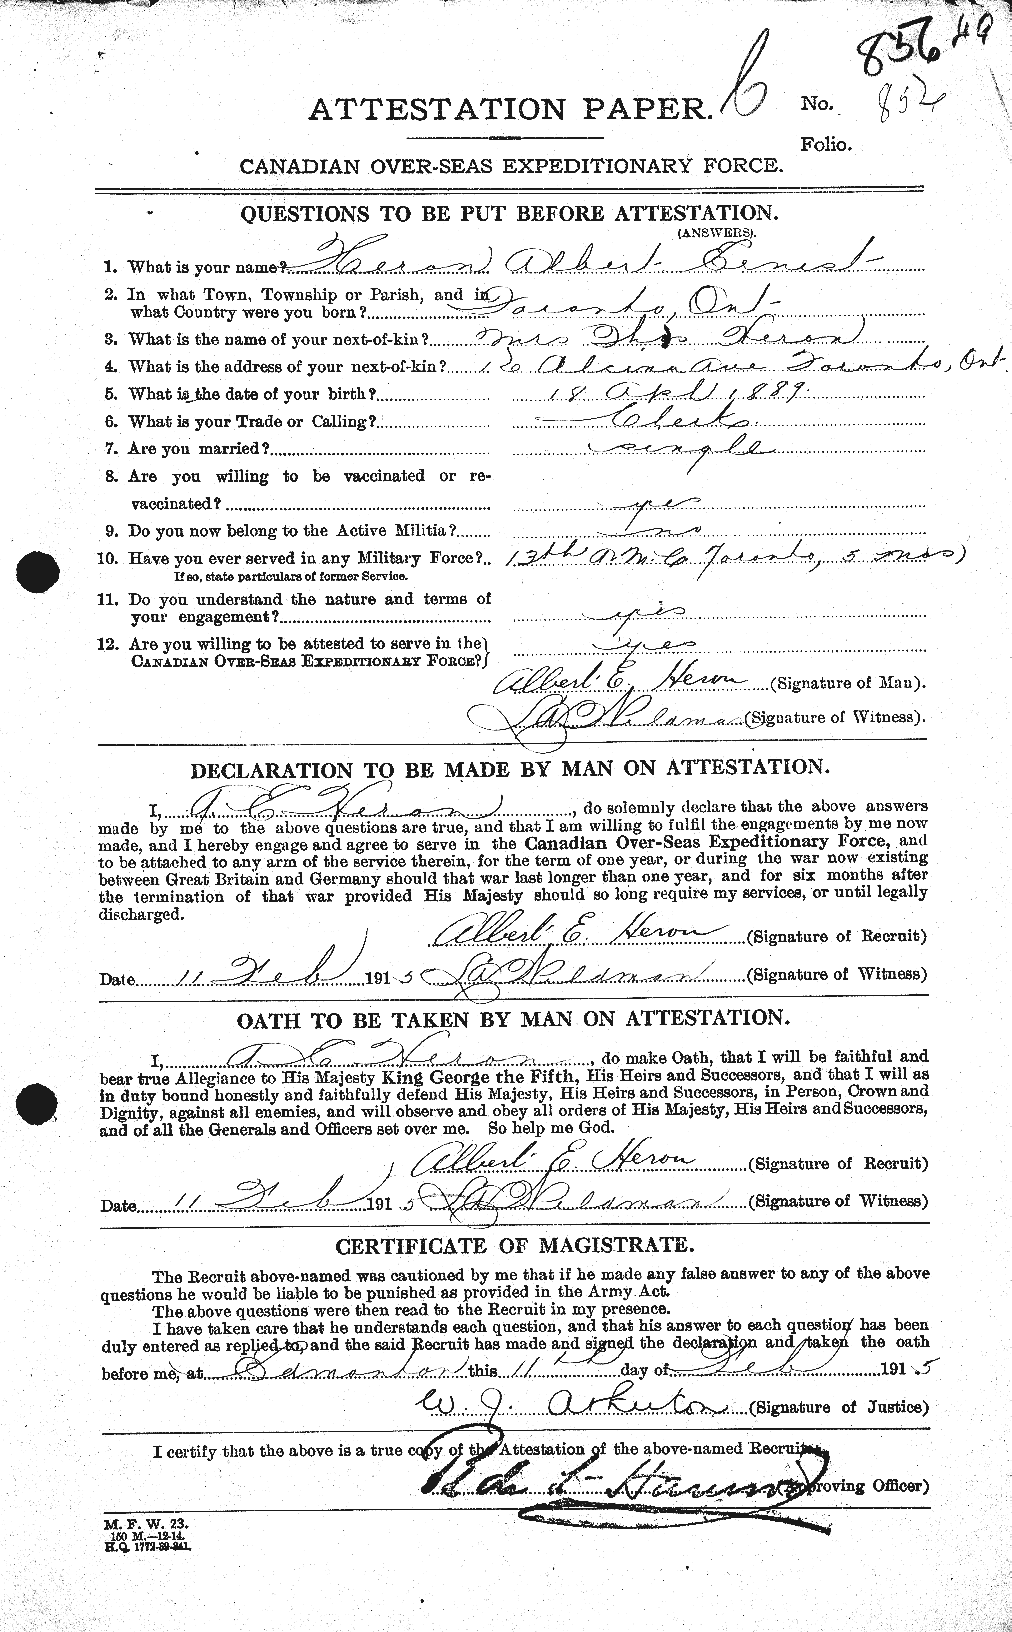 Personnel Records of the First World War - CEF 388435a